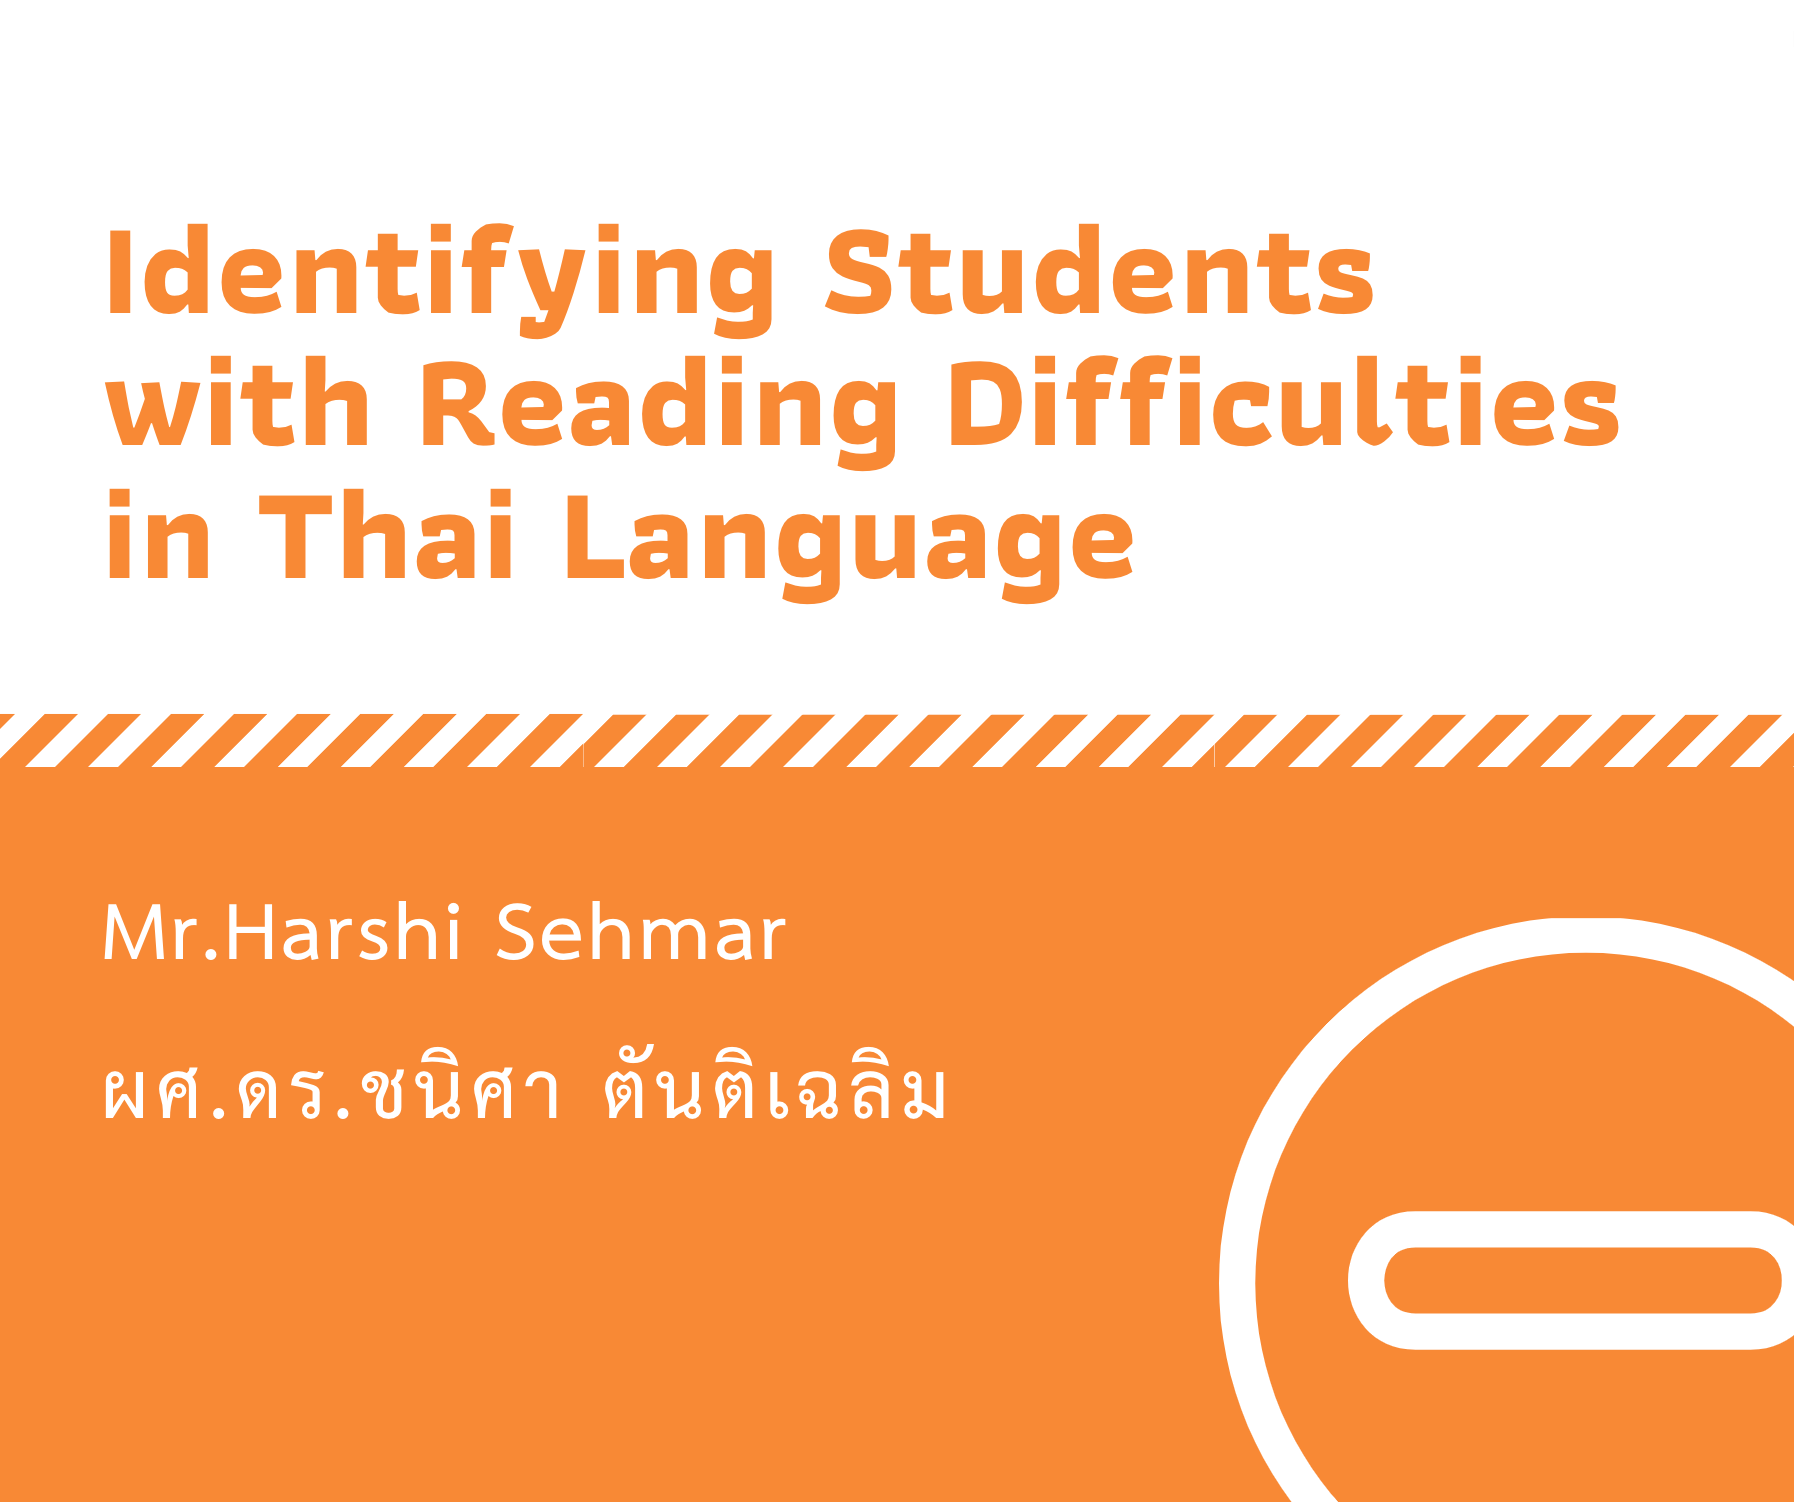 Workshop 6 - Identifying Students with Reading Difficulties in Thai Language